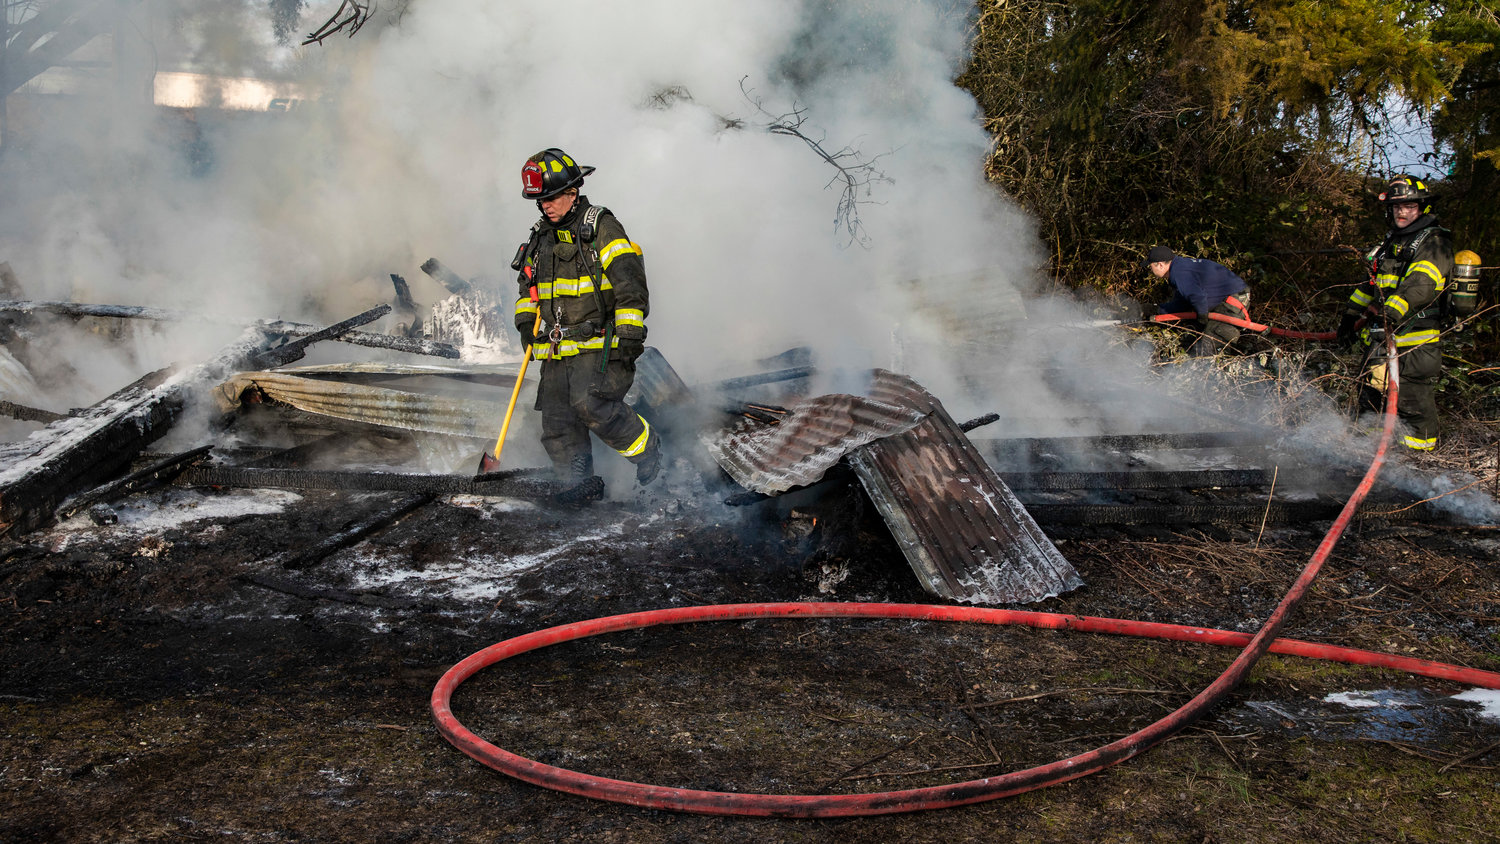 Captain Casey McCarthy, with Riverside Fire Authority, walks away from smoky debris while using an ax after flames destroyed an outbuilding that was supposed to be unoccupied along Long Road in Centralia Thursday morning.